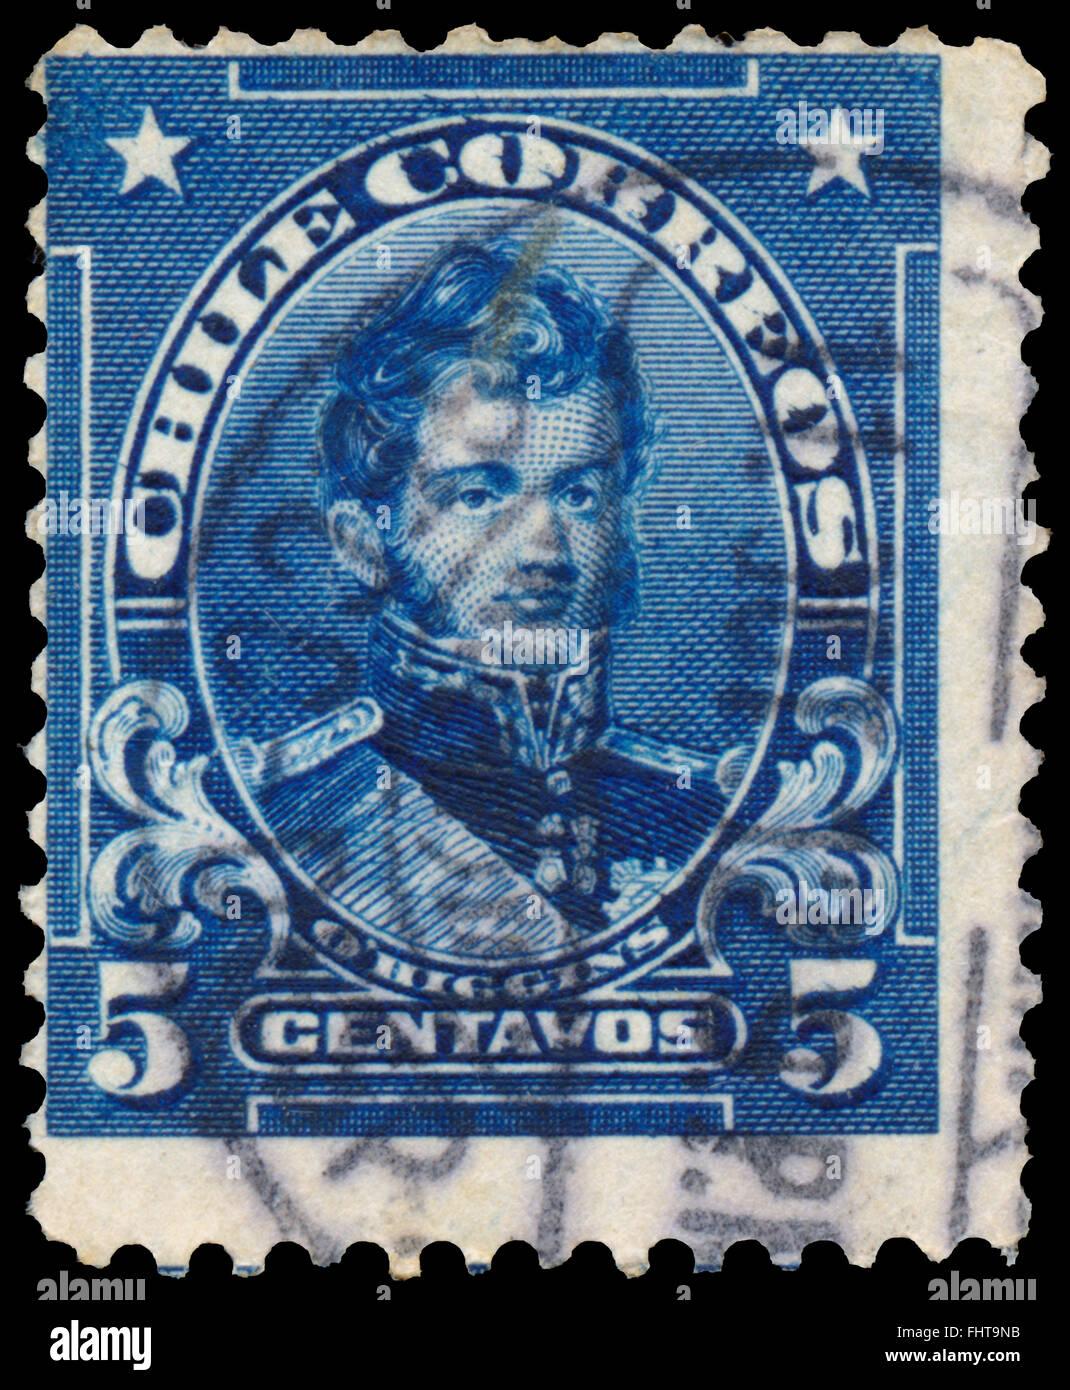 BUDAPEST, HUNGARY - 14 october 2015: a stamp printed in Chile shows Bernardo O'Higgins - Chilean independence leader, circa 1911 Stock Photo